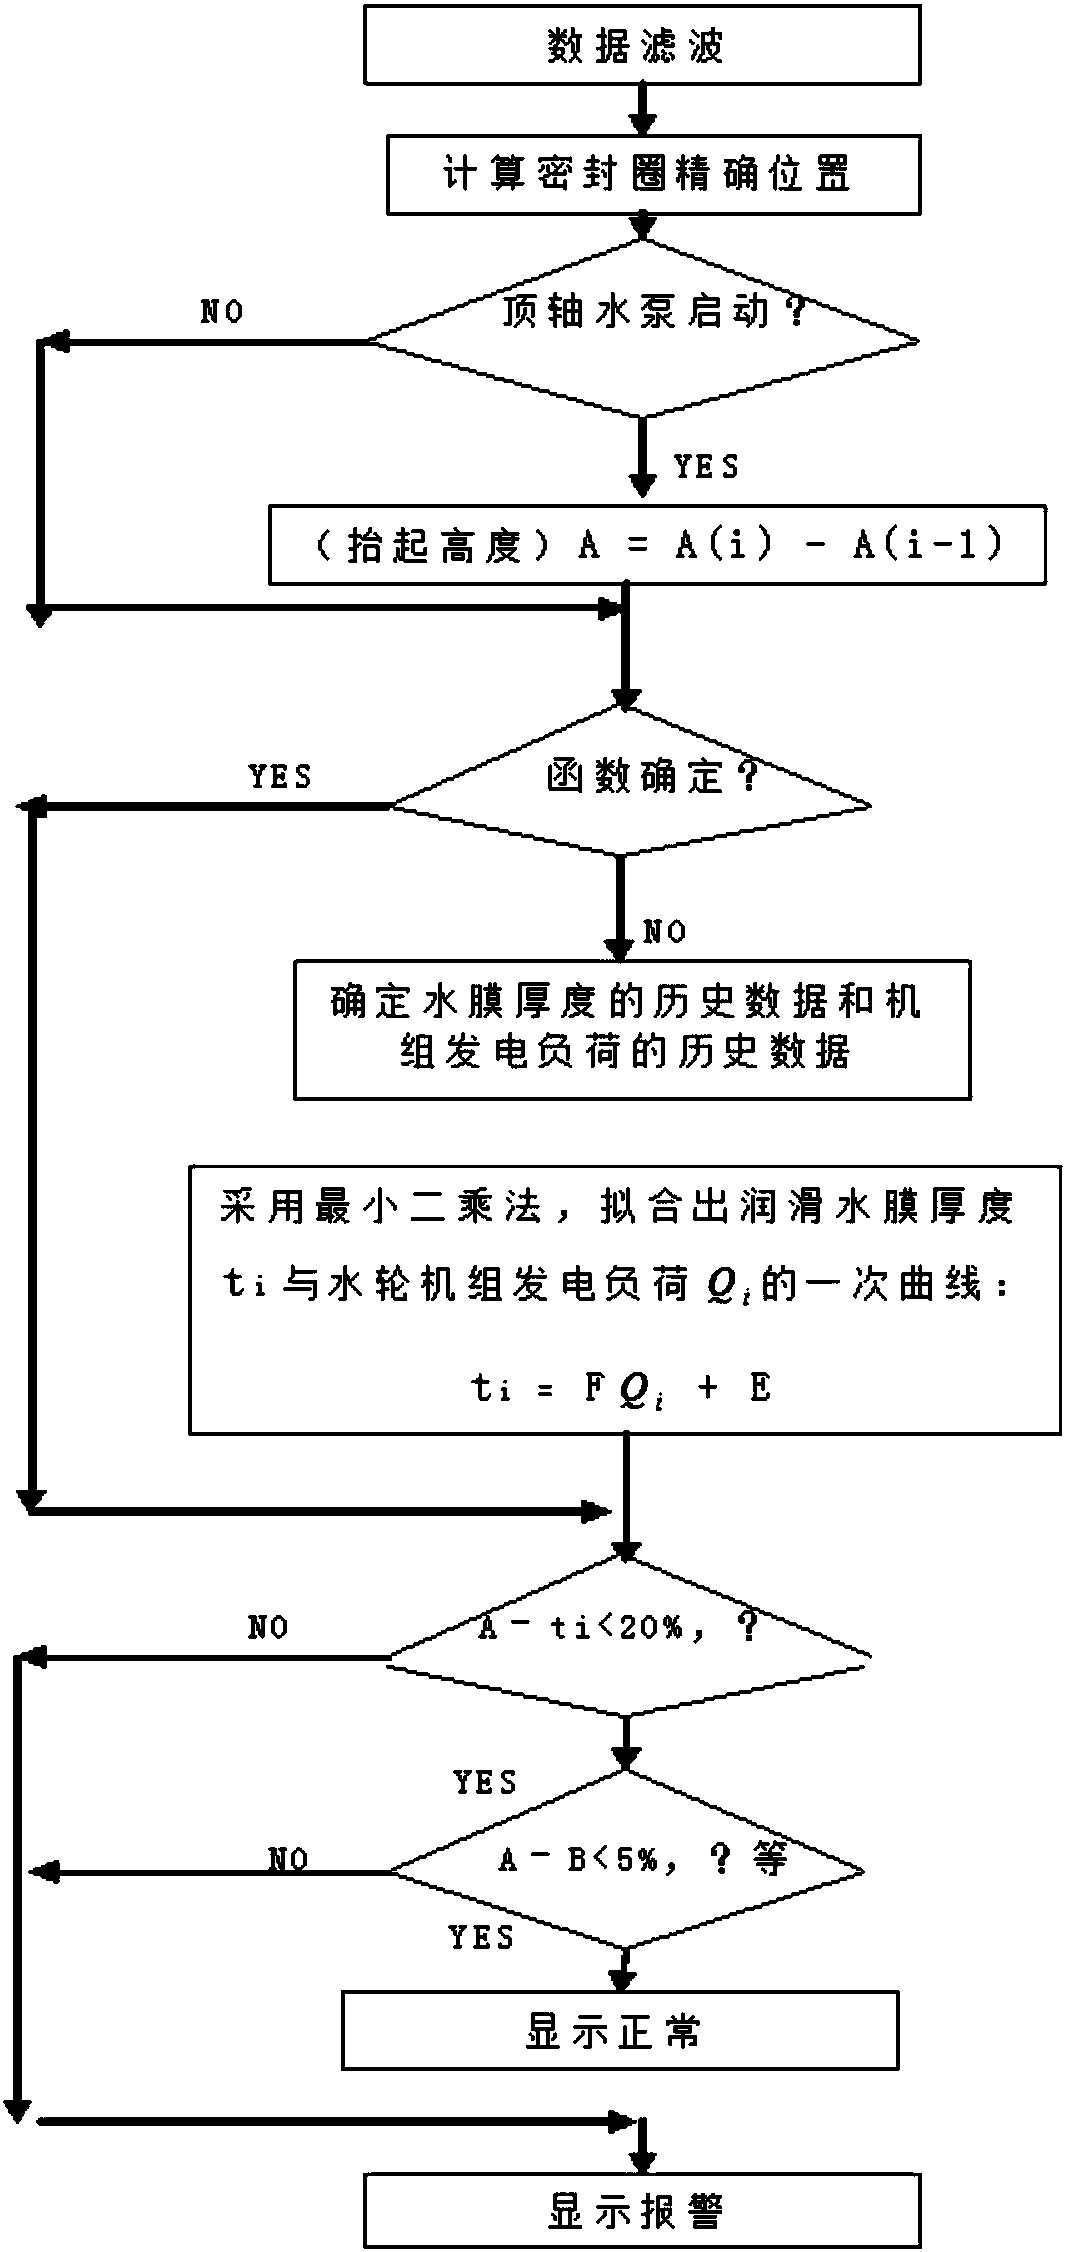 An online diagnosis device and method for the status of the shafting power system of a hydraulic turbine unit